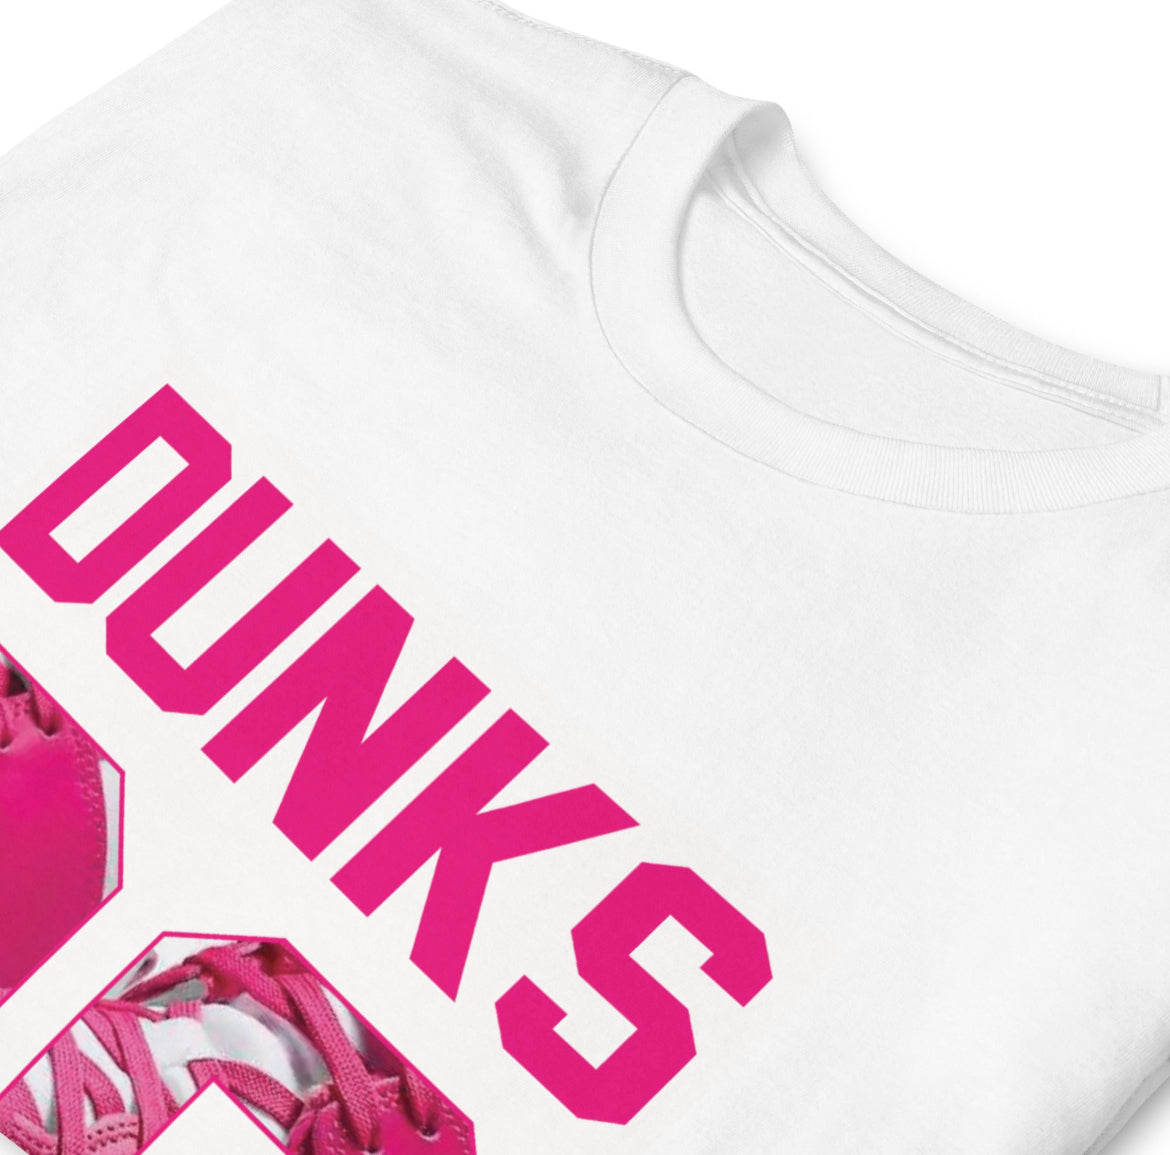 Pink and White Dunks Graphic T-Shirt